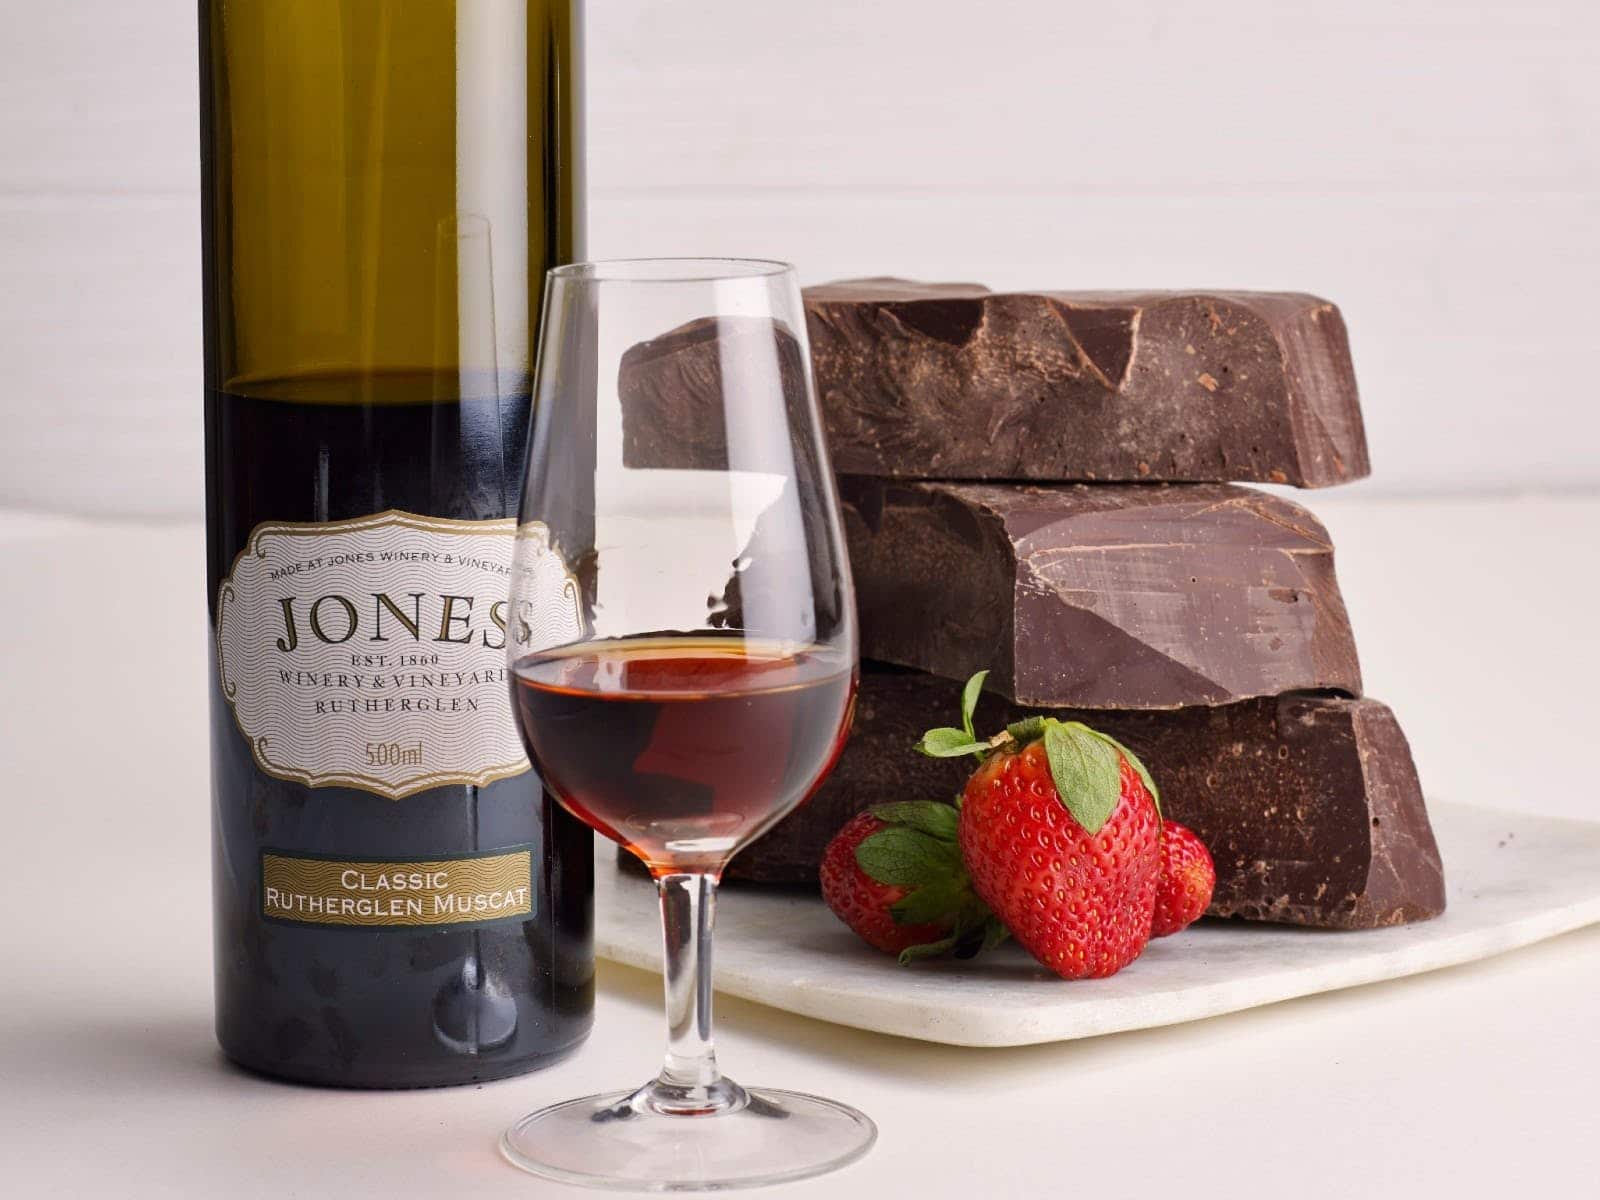 See how chocolate and Muscat are a match made in heaven